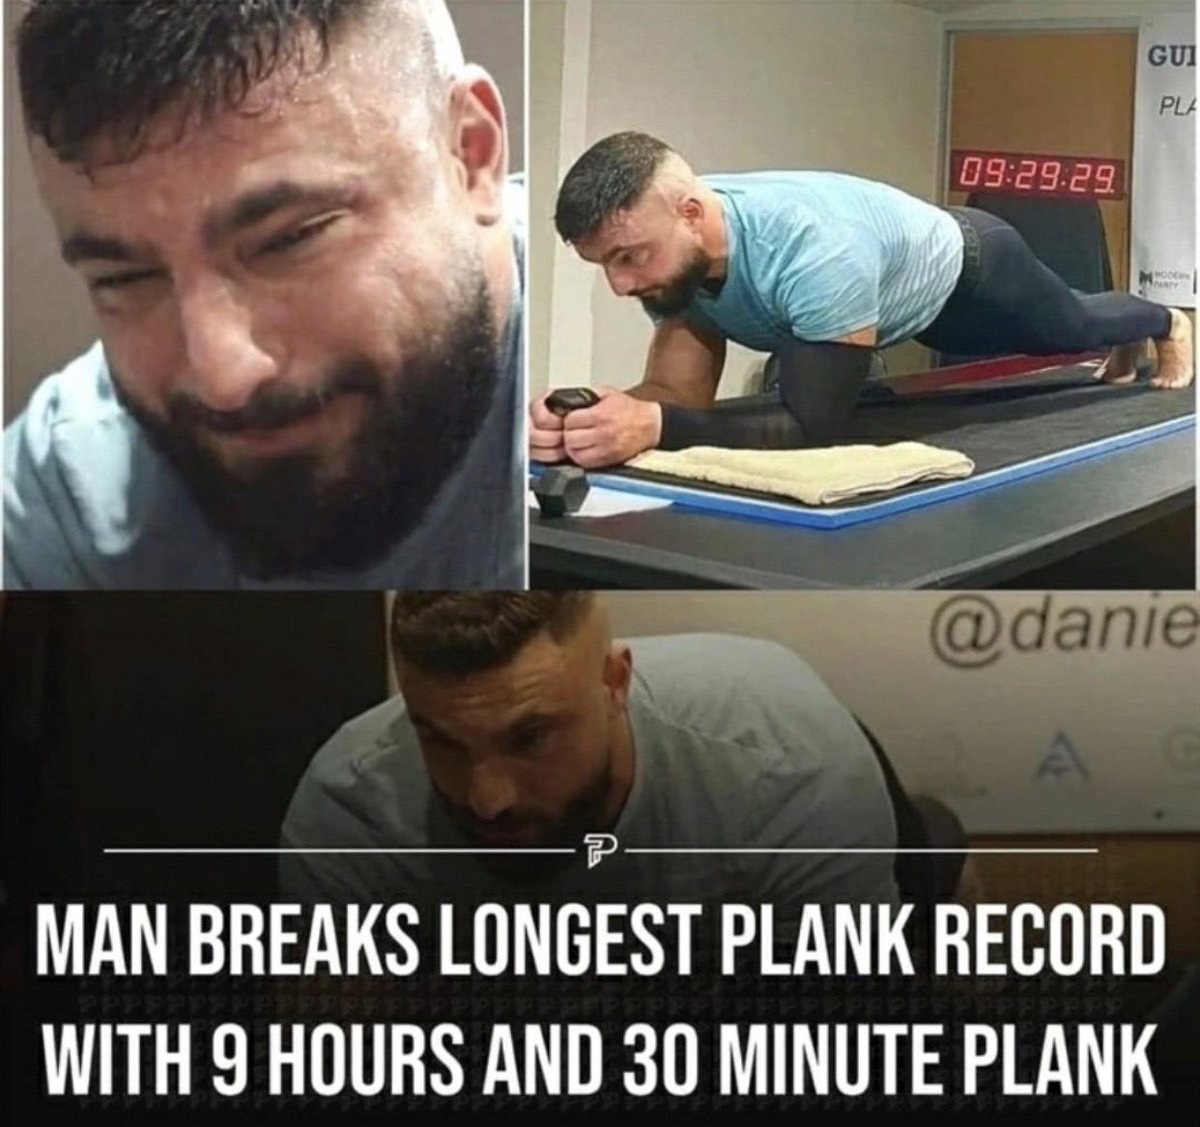 dudes post wins - daniel scali - Gui Pla .29. Va A ? Man Breaks Longest Plank Record With 9 Hours And 30 Minute Plank